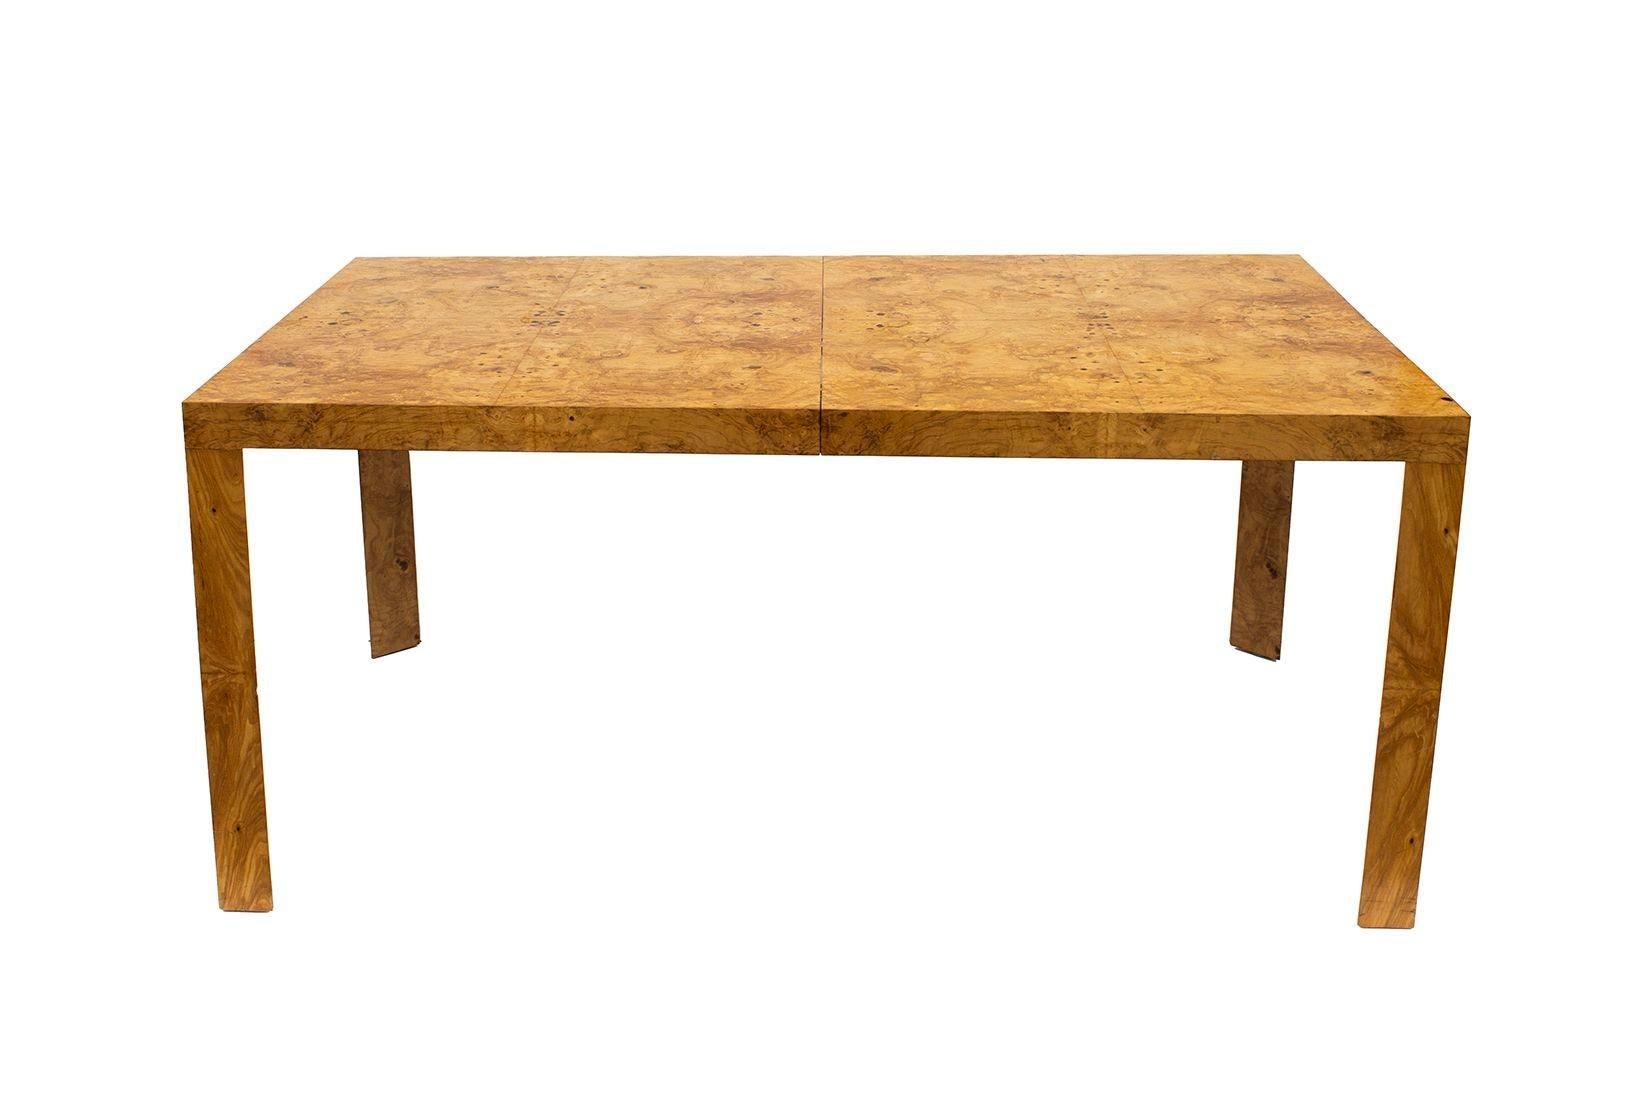 USA, 1970s
A substantial vintage burl dining table with triangular legs and two leaves. The geometric design of the legs lends a nice complement to the clean-lined parsons style and bookmatched burlwood. Slim profile legs and made to Dunbar quality.